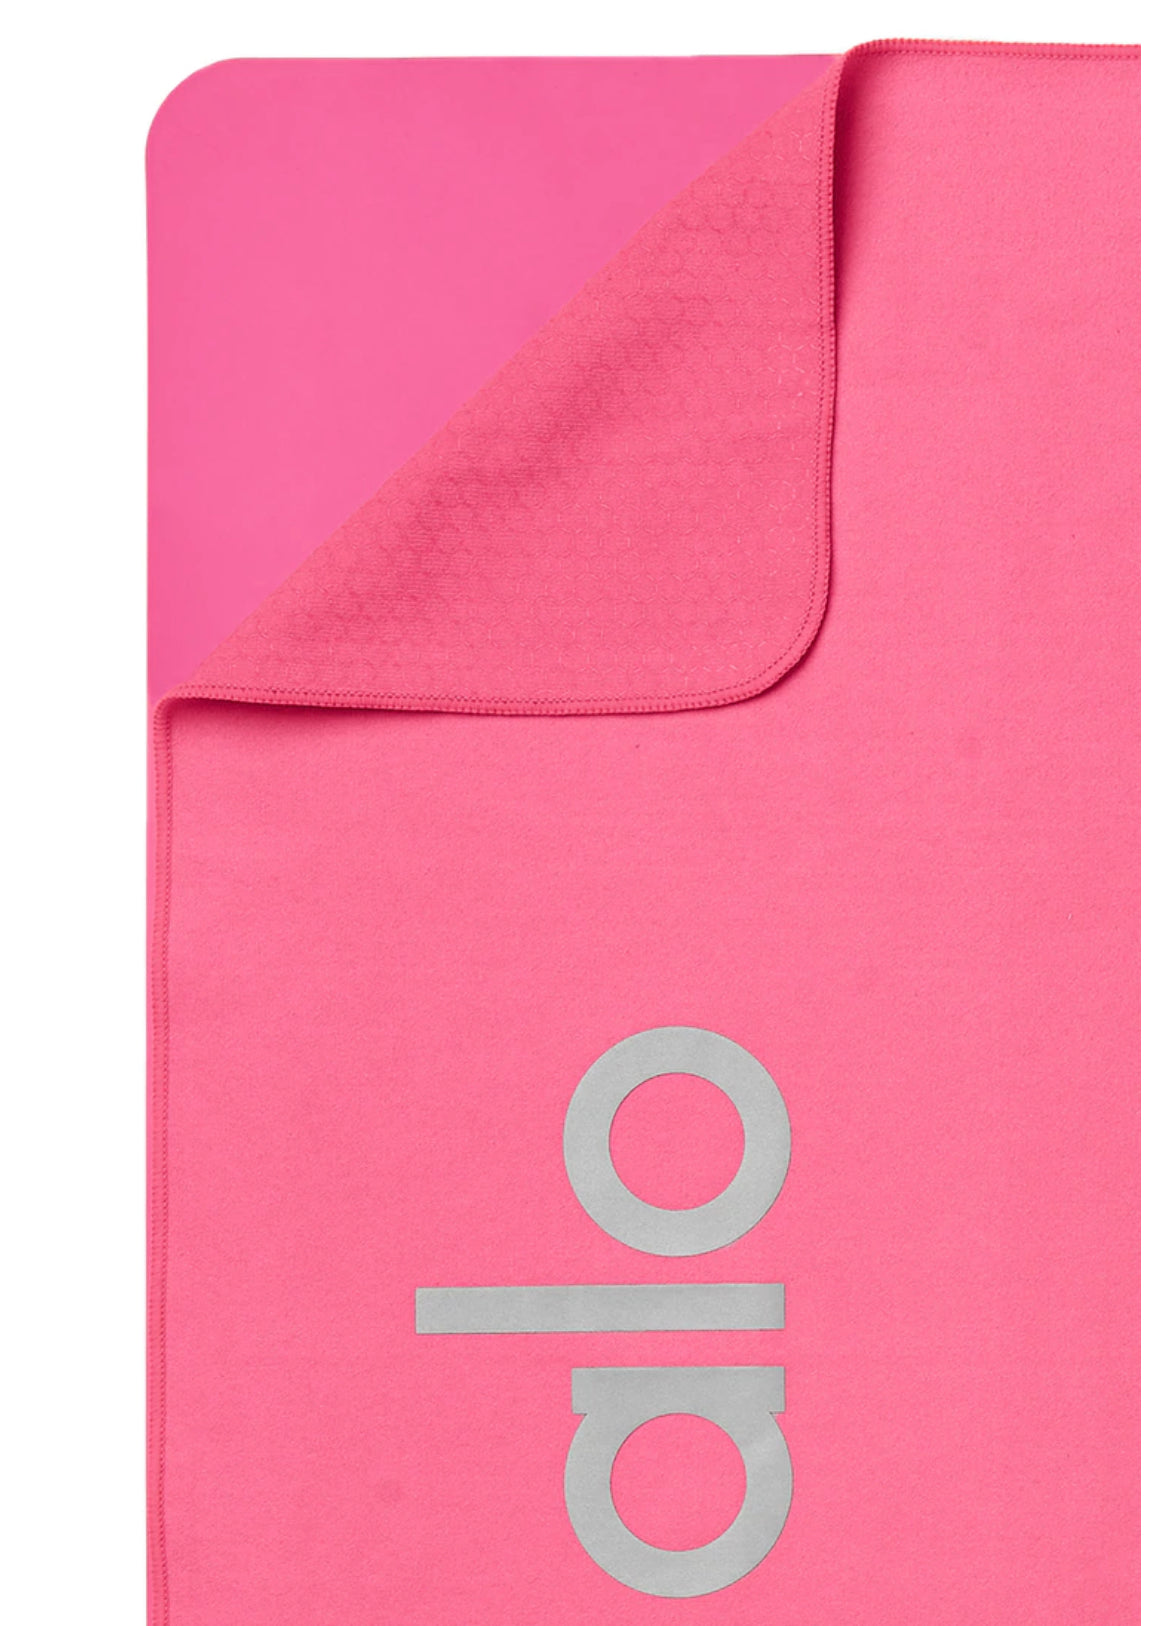 Alo Yoga Grounded No-Slip Mat Towel, Hot Pink, One size : :  Sports & Outdoors